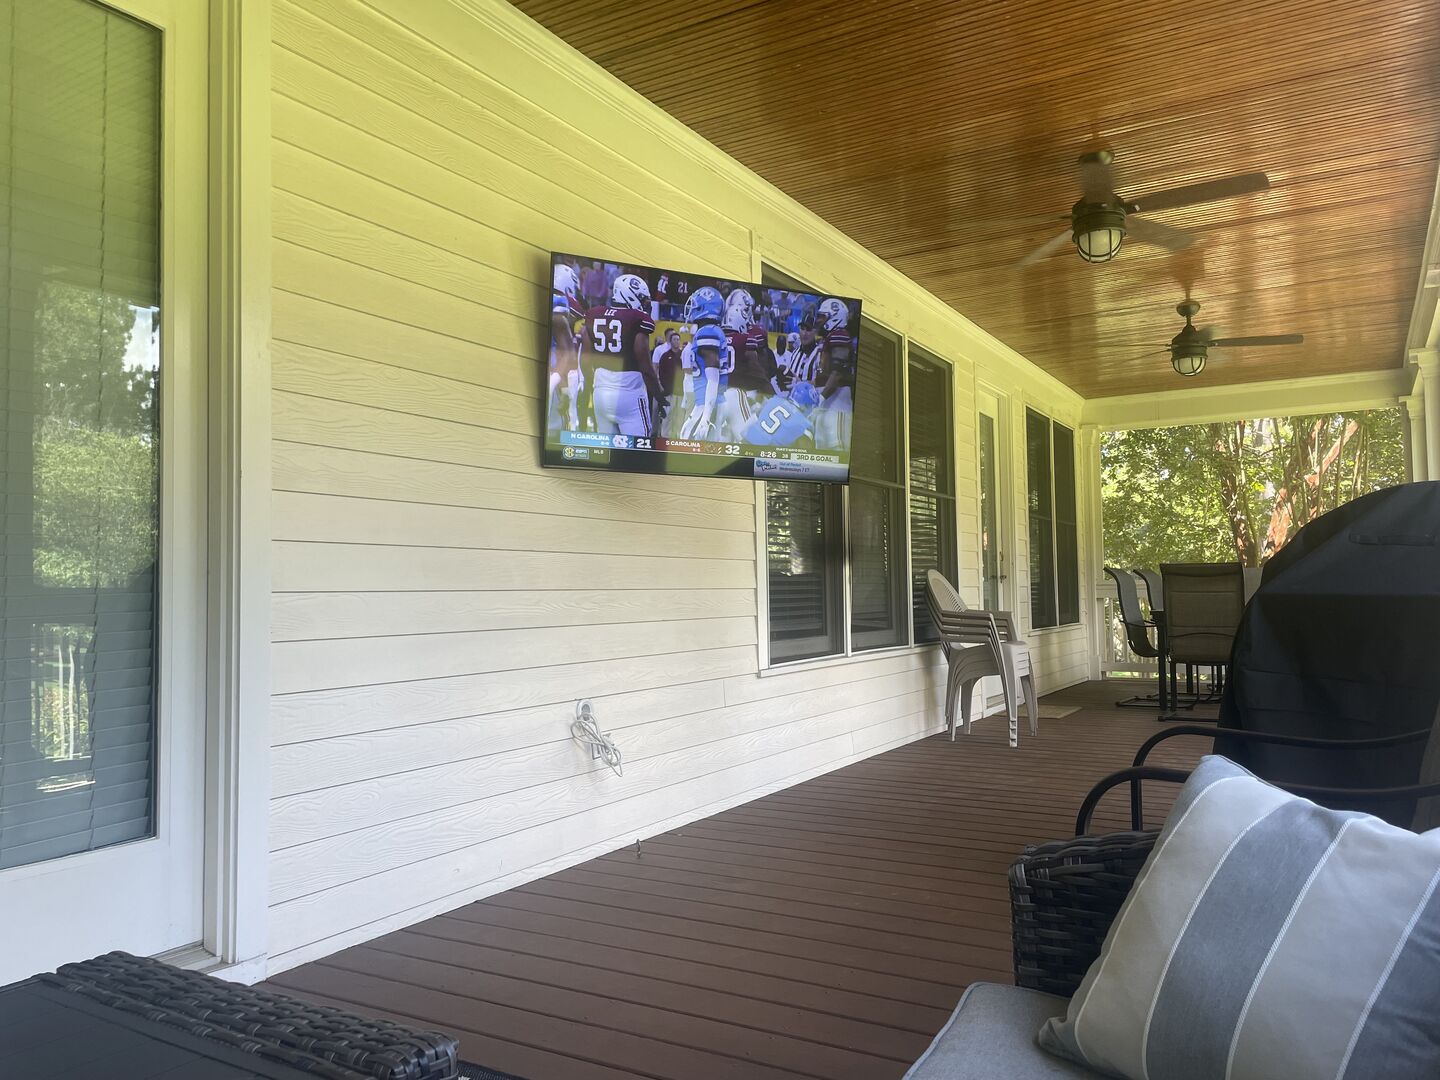 Screened porch complete with a new outdoor tv!